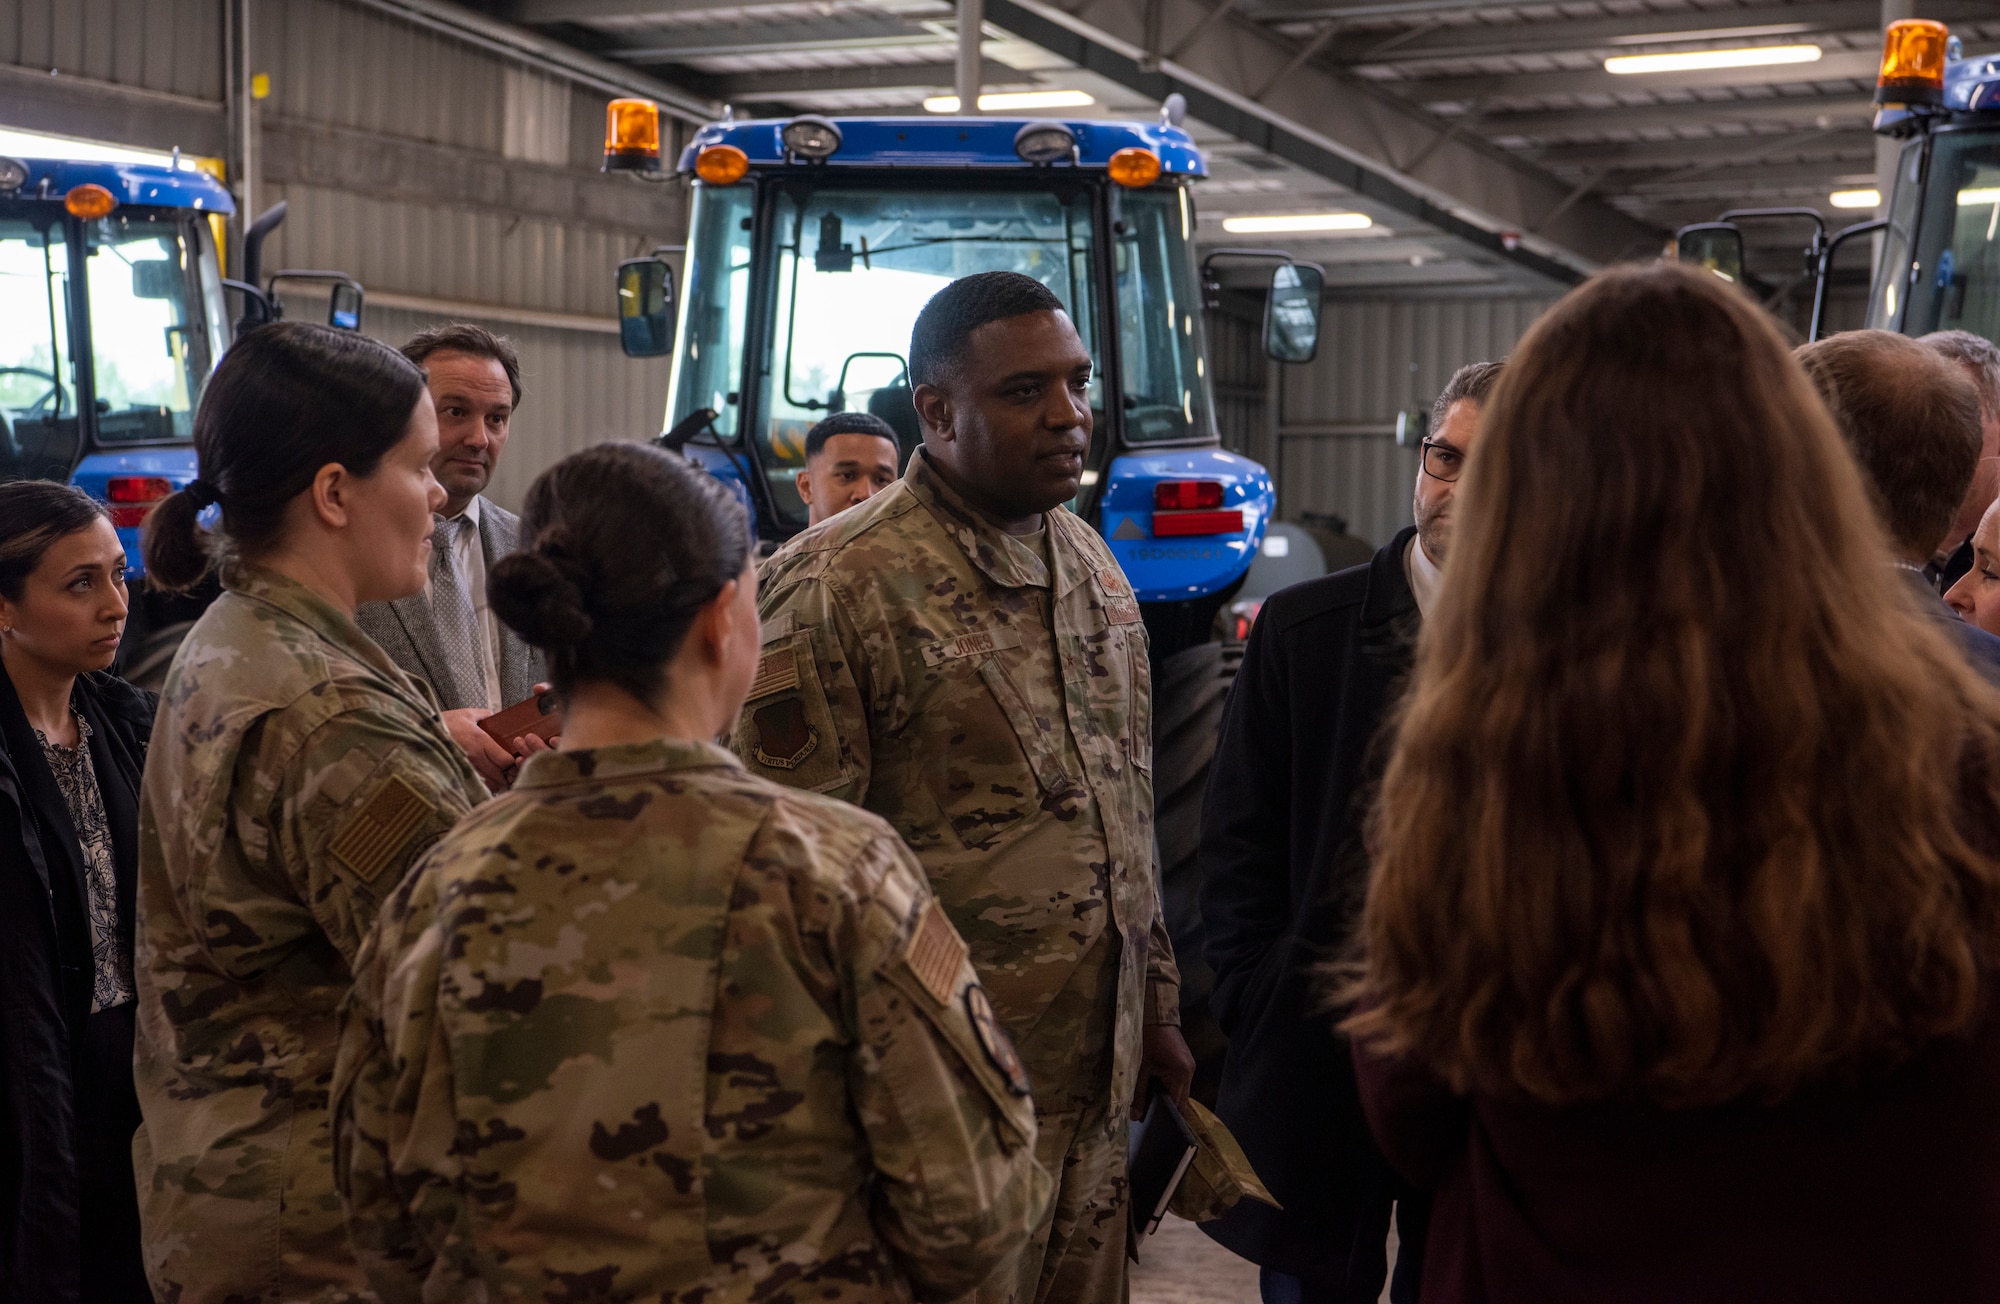 U.S. Air Force Brig. Gen. Otis C. Jones, 86th Airlift Wing commander, speaks with German dignitaries during a tour of a Department of Defense storage facility in Pirmasens, Germany, May 12, 2023.